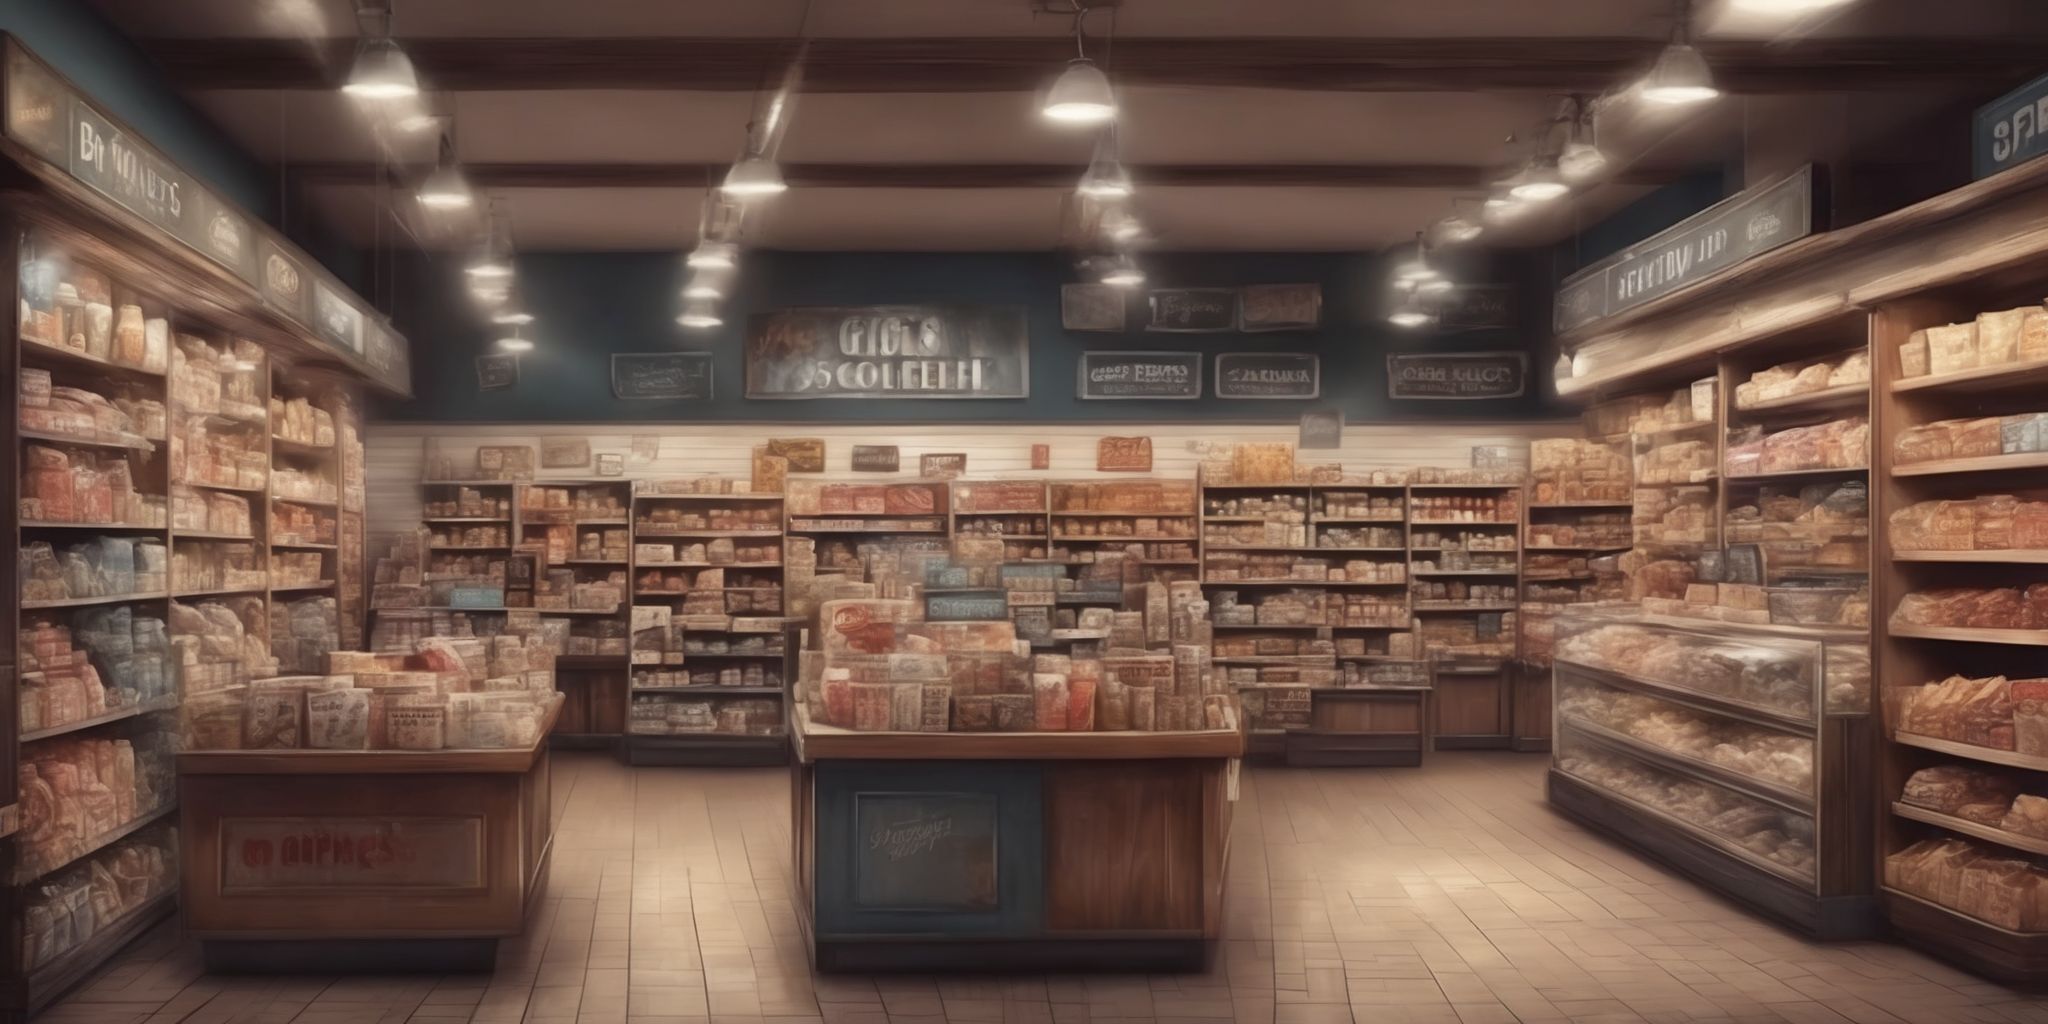 Stores  in realistic, photographic style